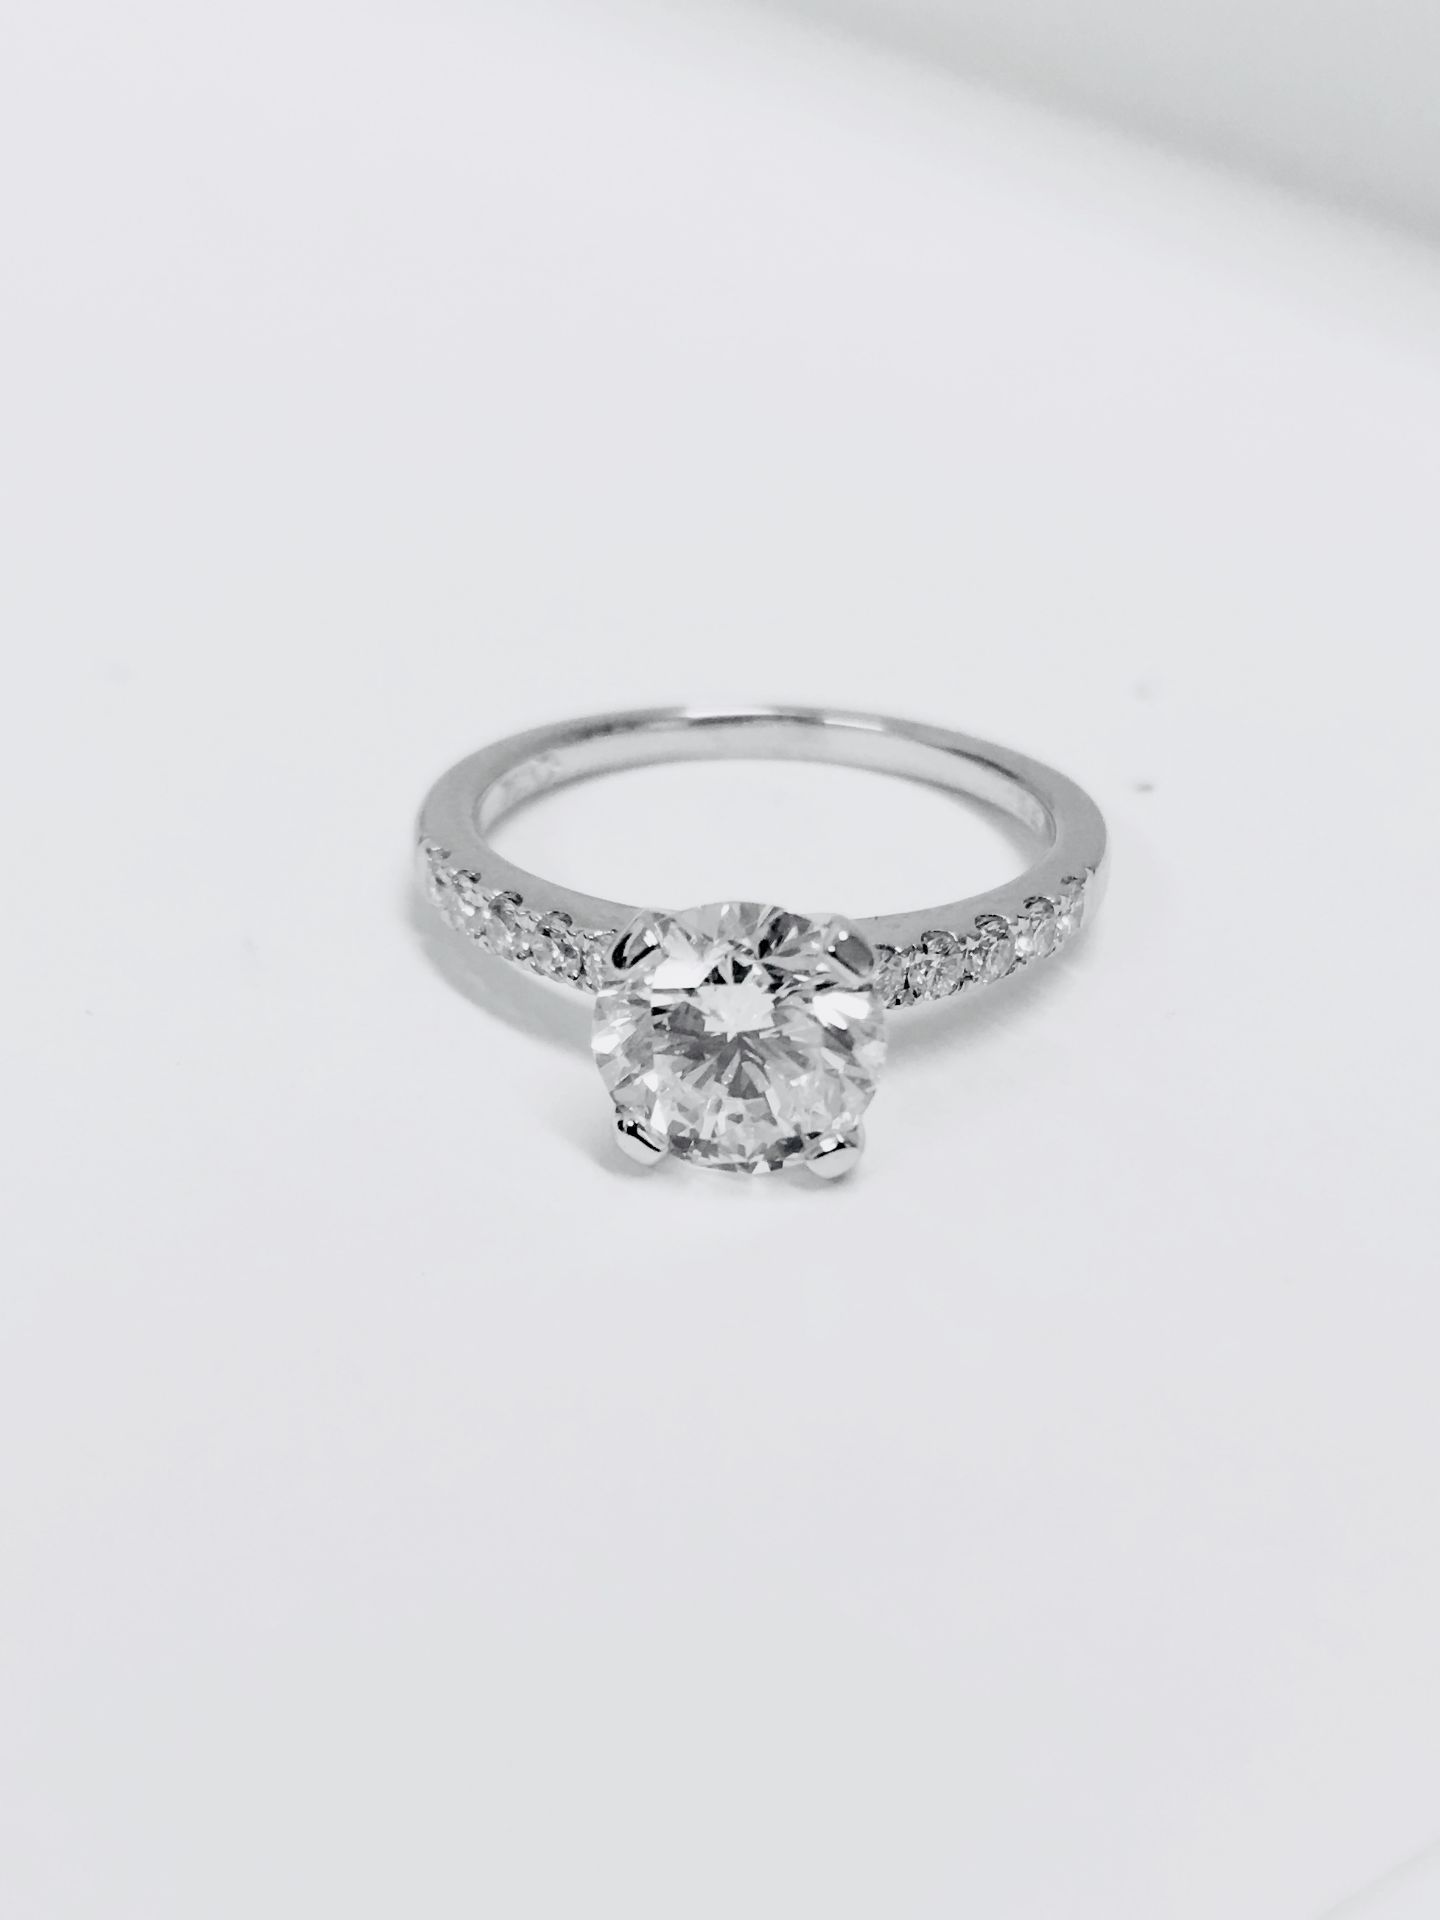 1ct Diamond solitaire ring,1ct h si2 clarity natural diamond ,18ct white gold diamond setting 2.9gms - Image 2 of 3